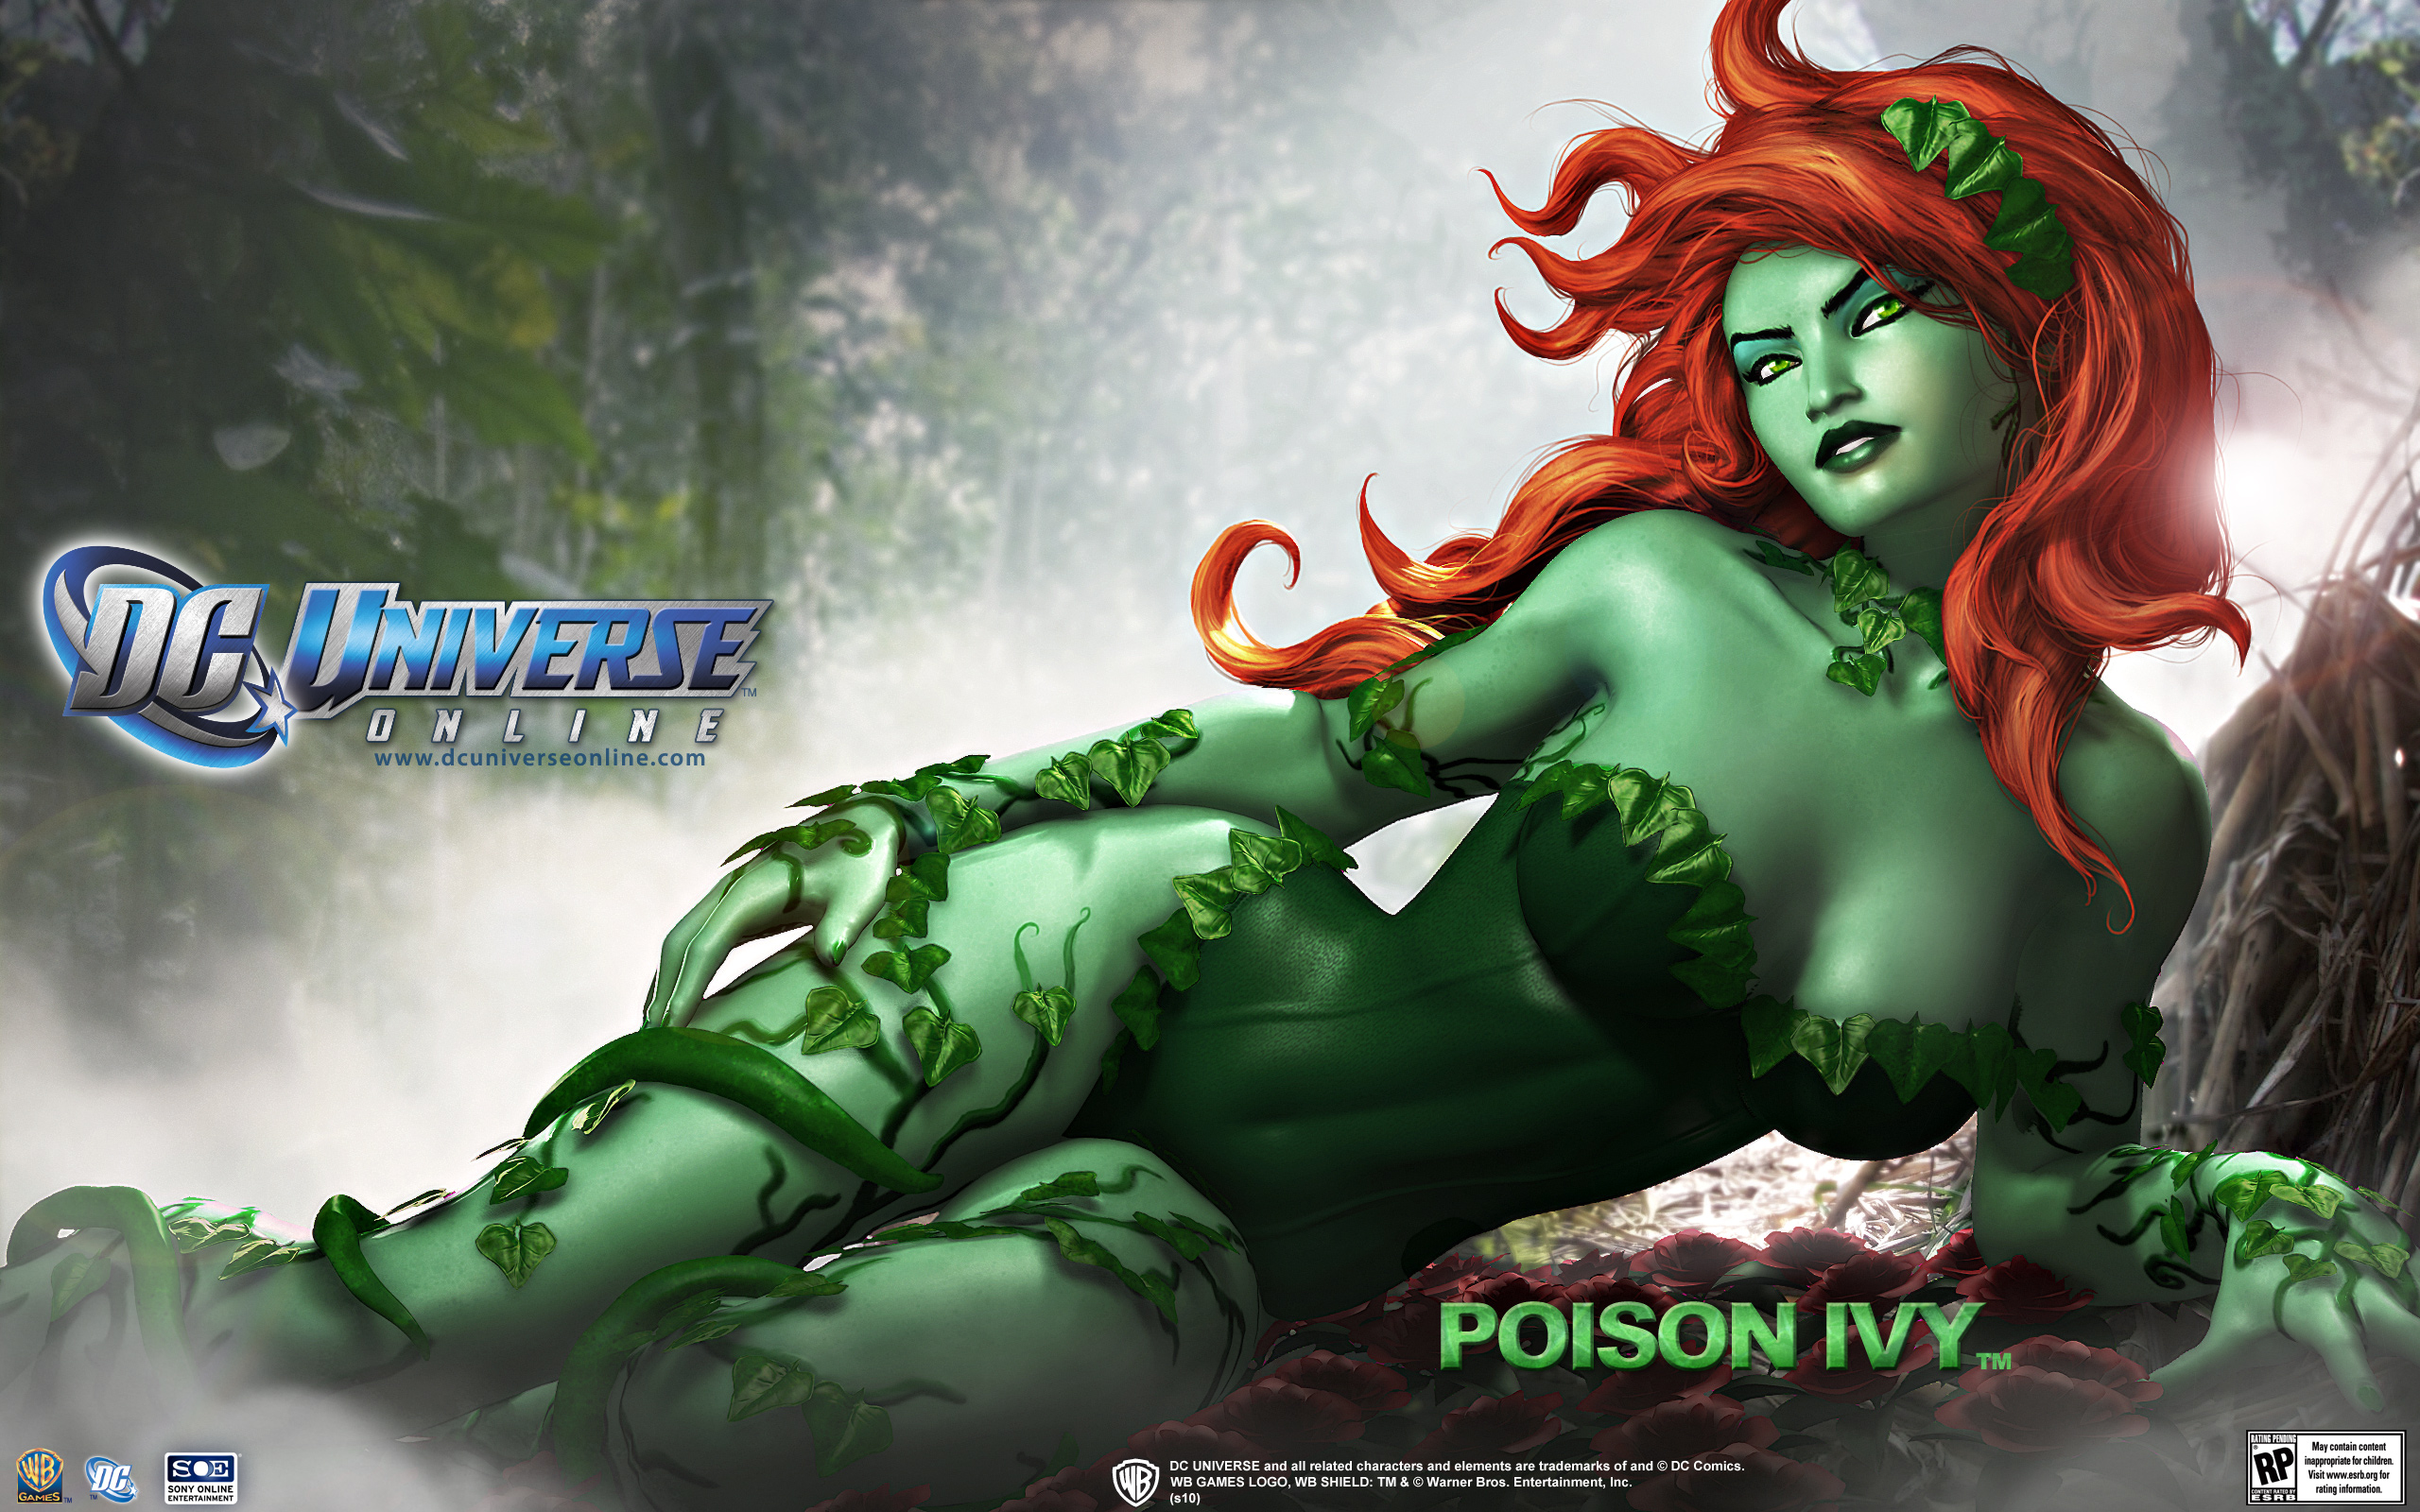 Poison Ivy, DC Comics character with long orange hair, lying down, gazing with green eyes.